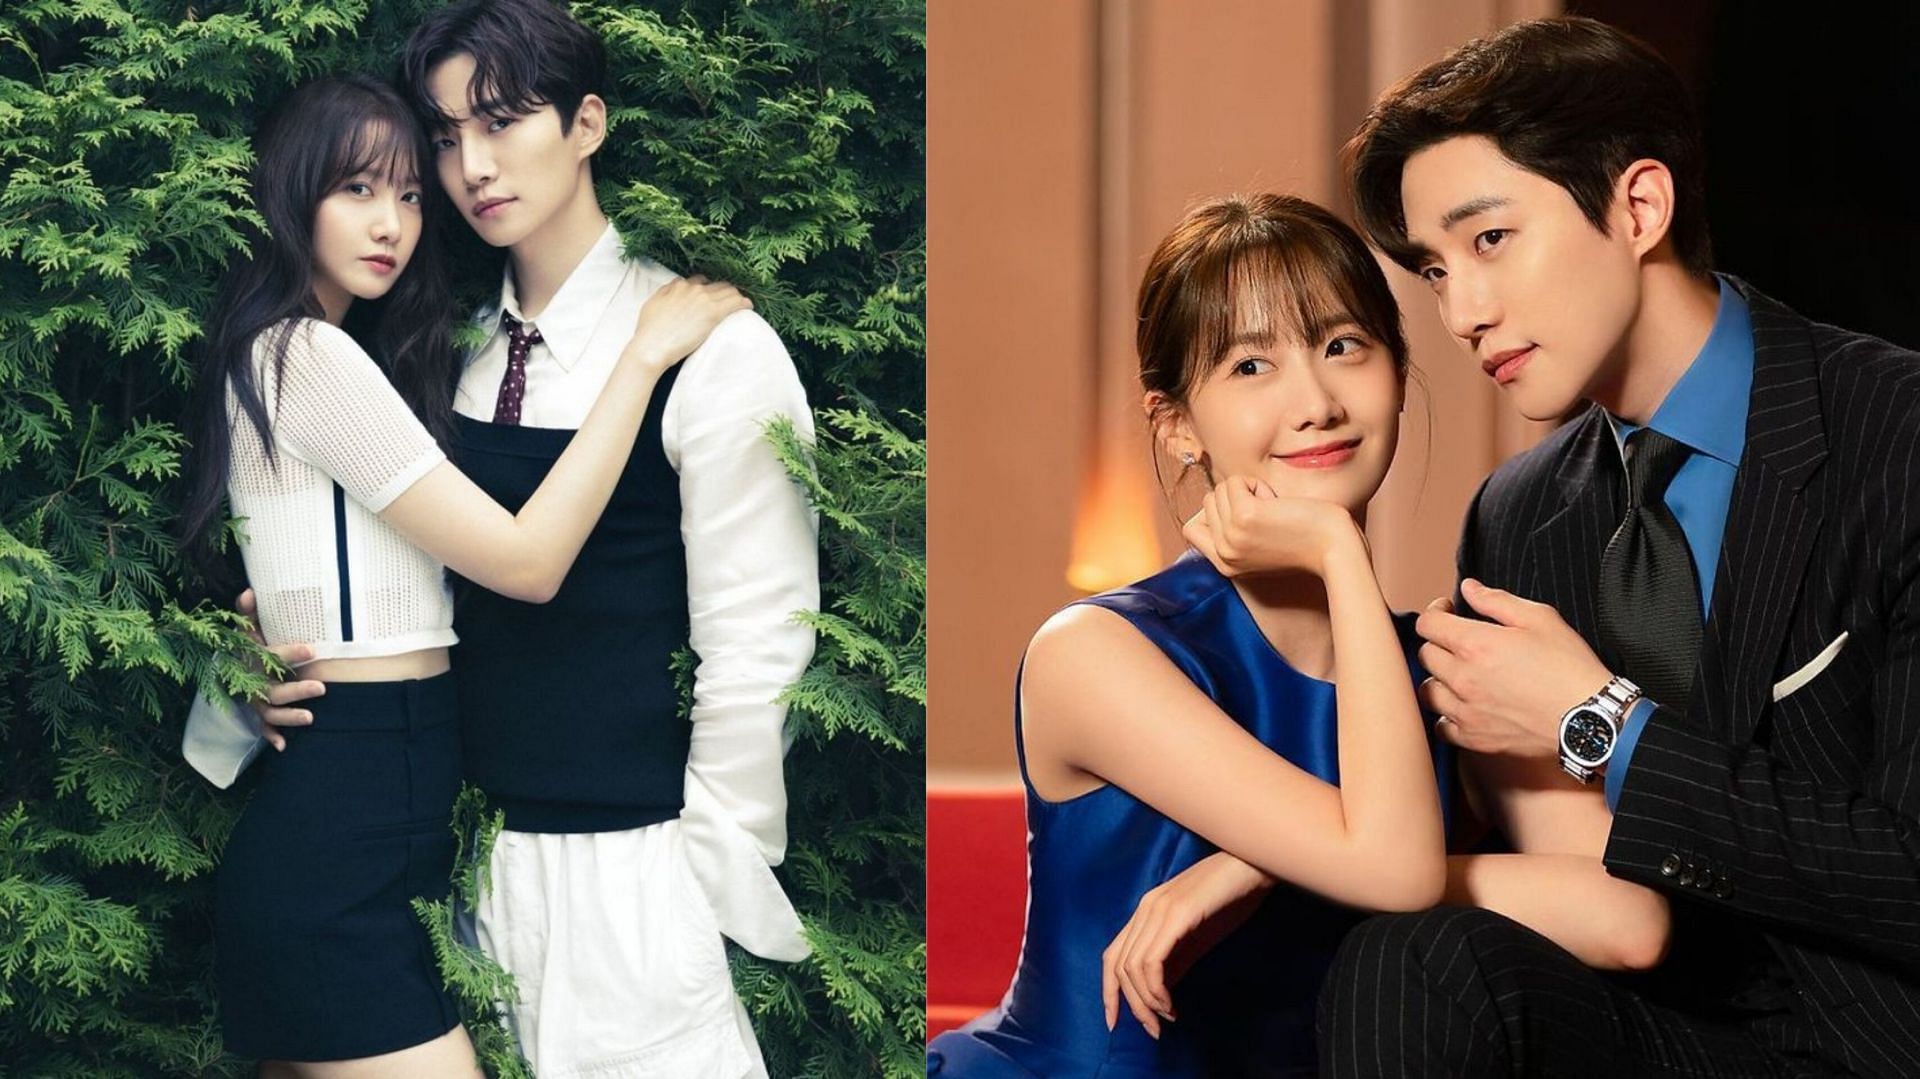 "My Visual Couple" Fans go gaga as Yoona and Lee Junho are speculated